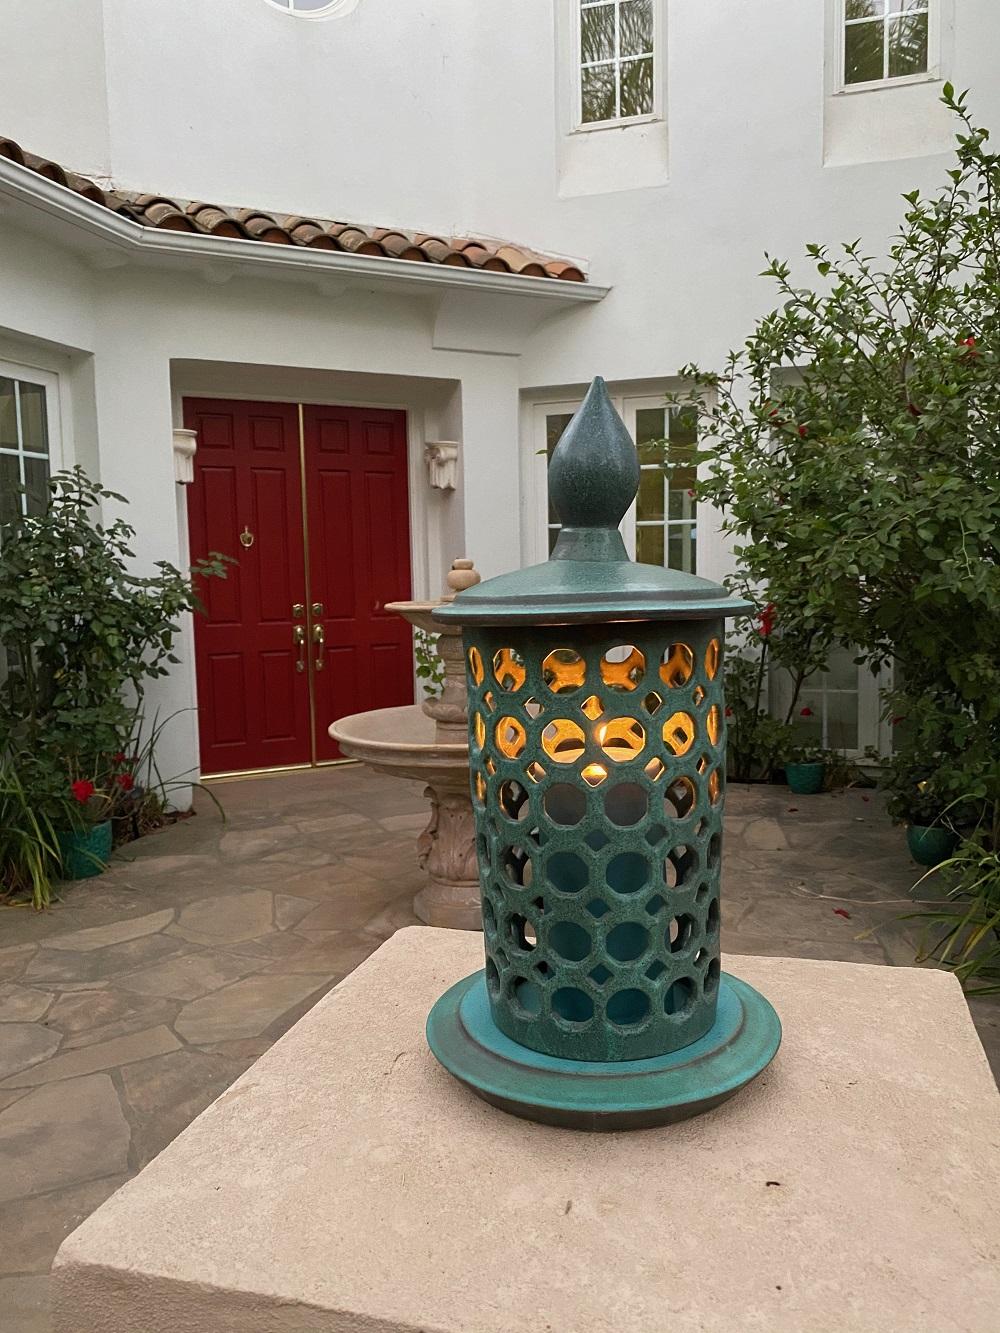 A new twist on a traditional lantern this three-piece design, is wheel thrown and hand pierced stoneware with a weathered bronze glaze. Small holes are created when the clay is still wet and then each hole is painstakingly enlarged and smoothed when